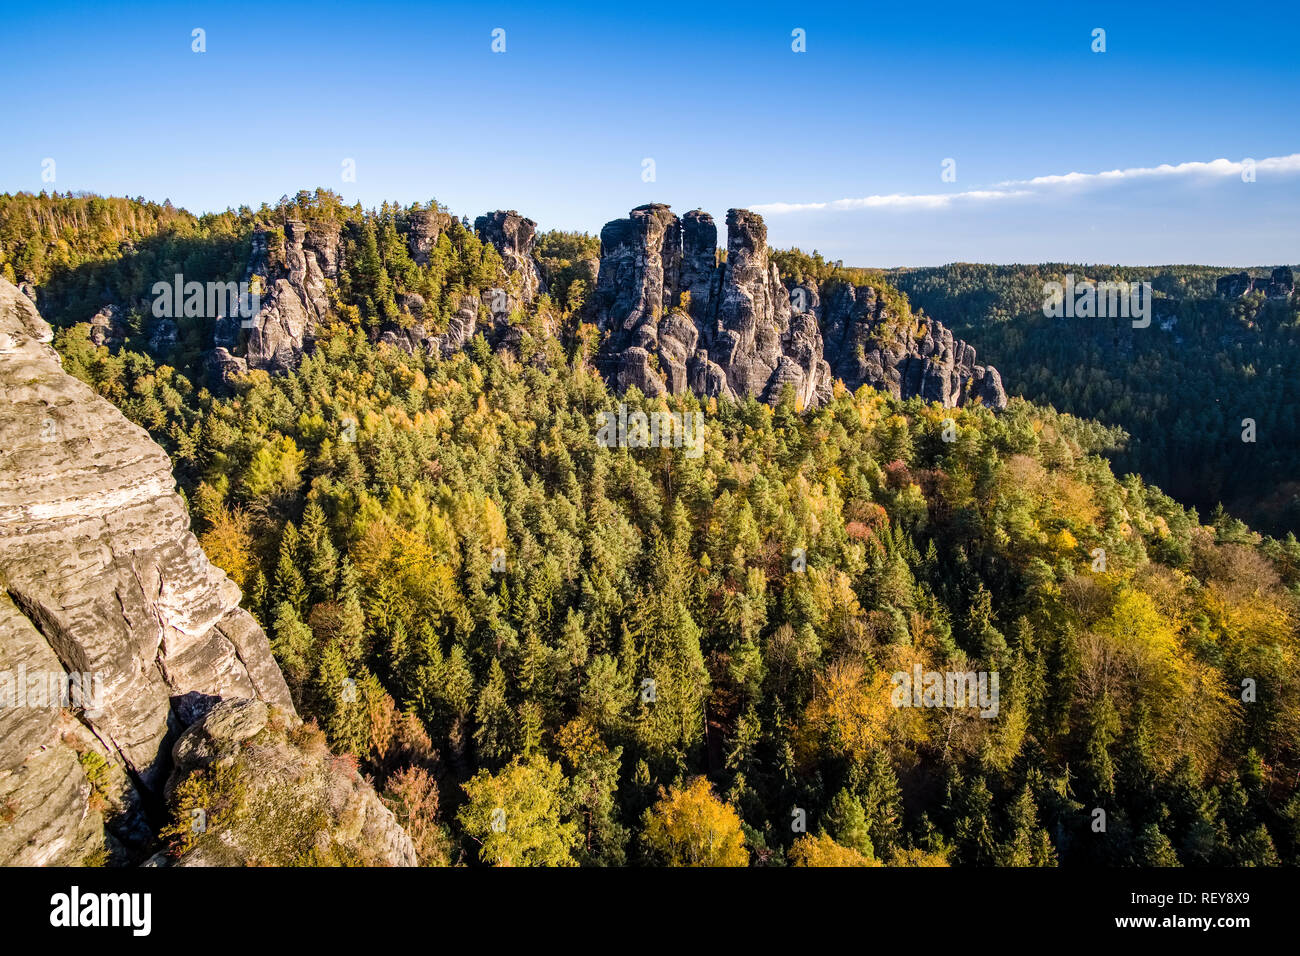 Landscape in the National Park Sächsische Schweiz with the rock formation Gansfels and trees Stock Photo